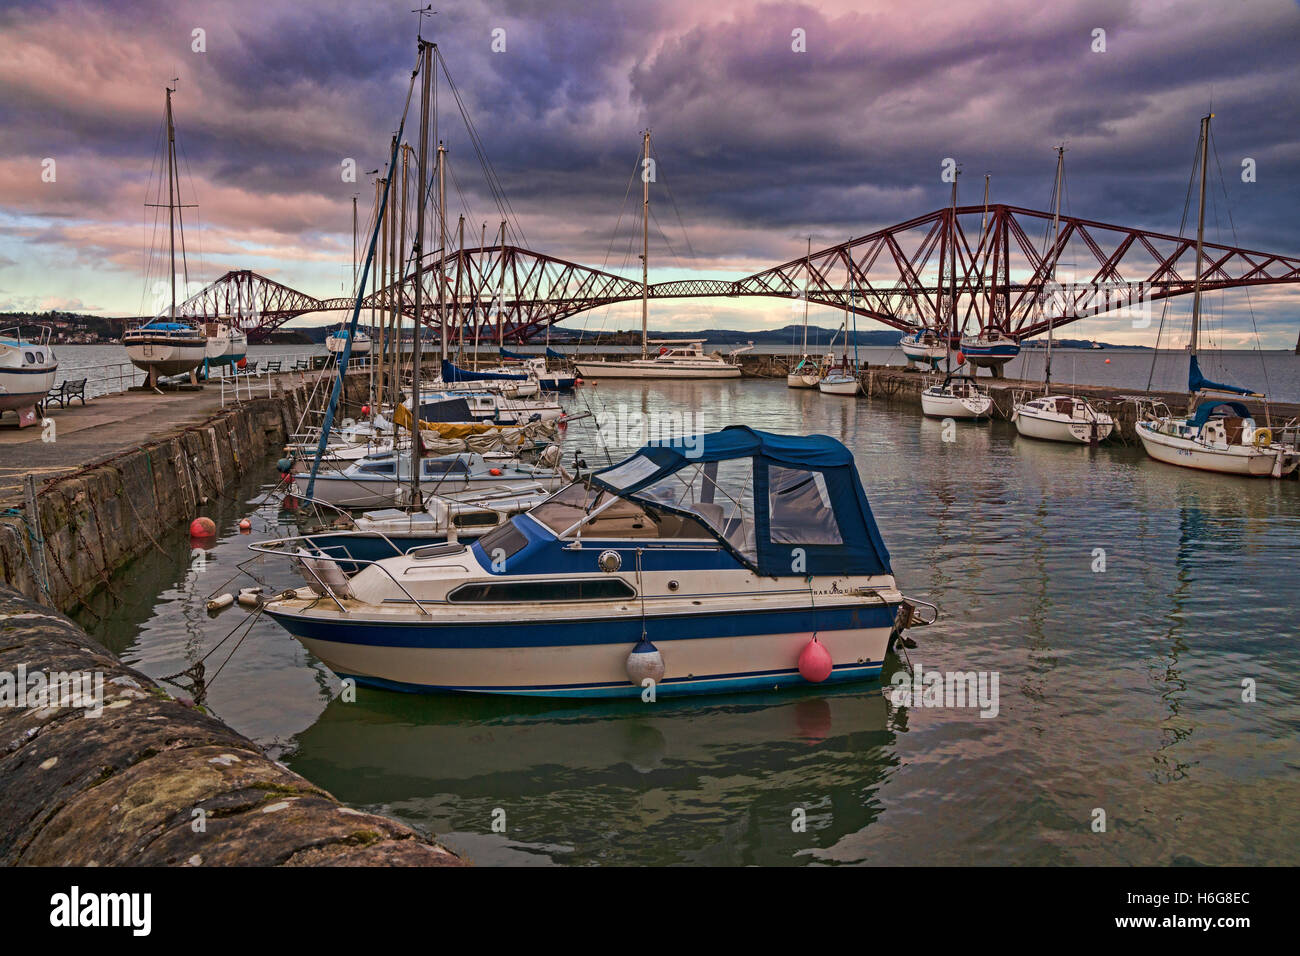 Forth Railway Bridge from old harbour, sunset, South Queensferry, west lothian, Edinburgh, Scotland, UK Stock Photo